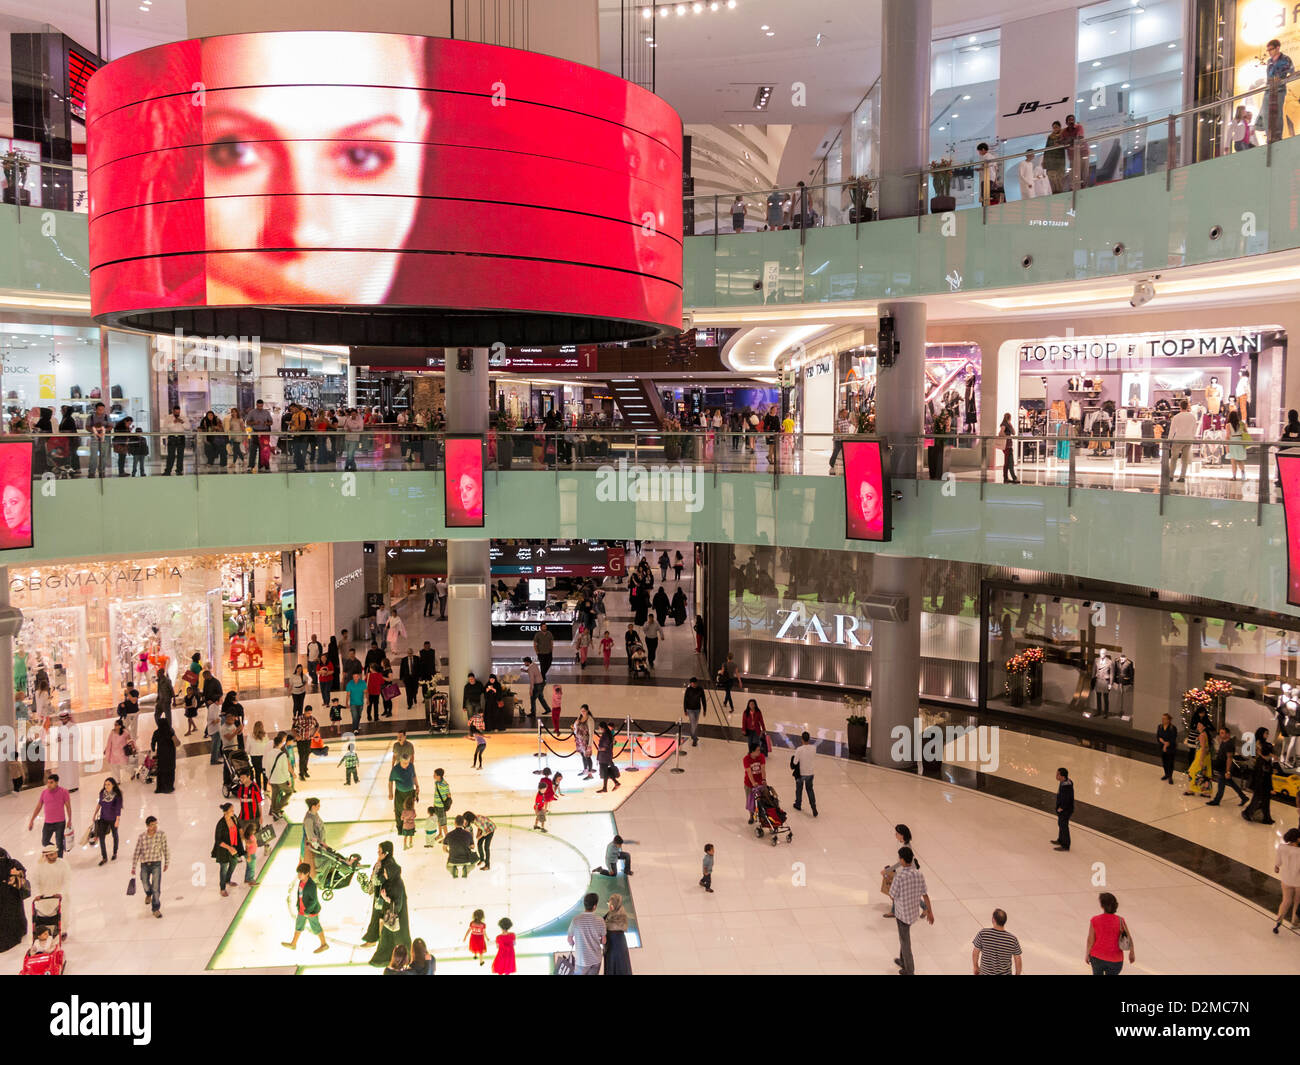 Dubai Mall - The world's largest shopping mall, shopping centre Stock Photo